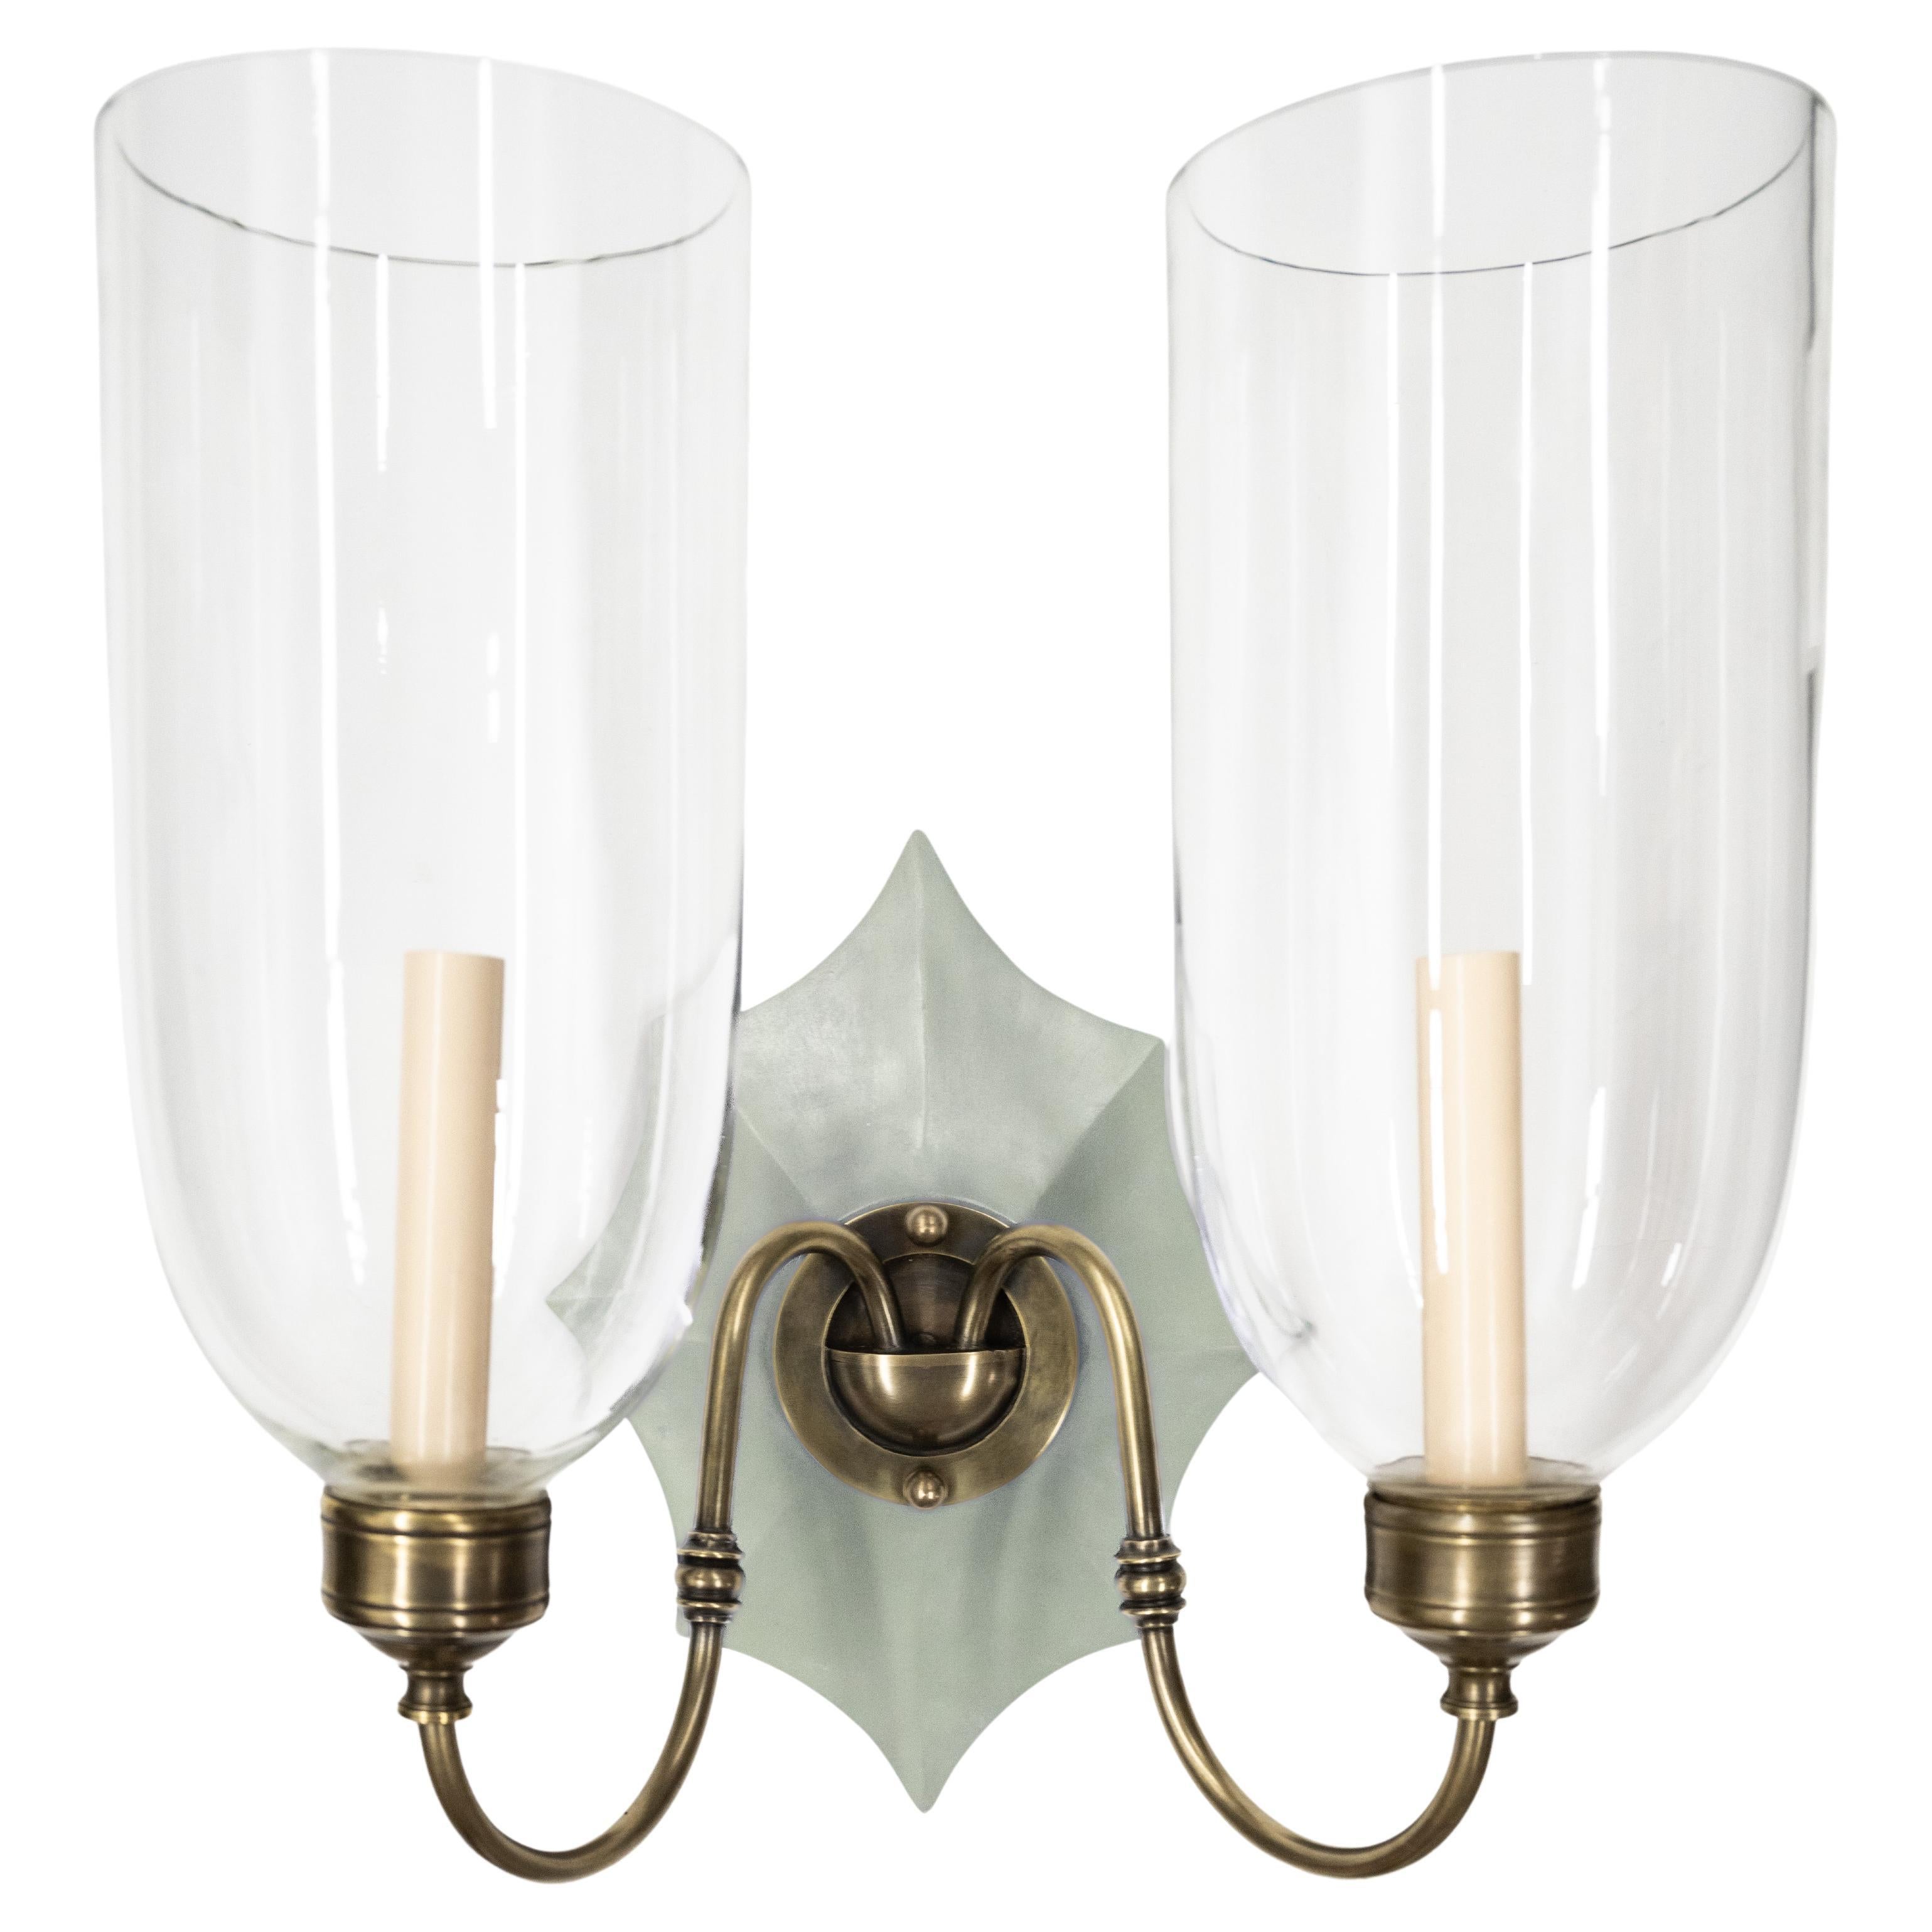 Hurricane Sconces with Double Kent-Style Arms For Sale